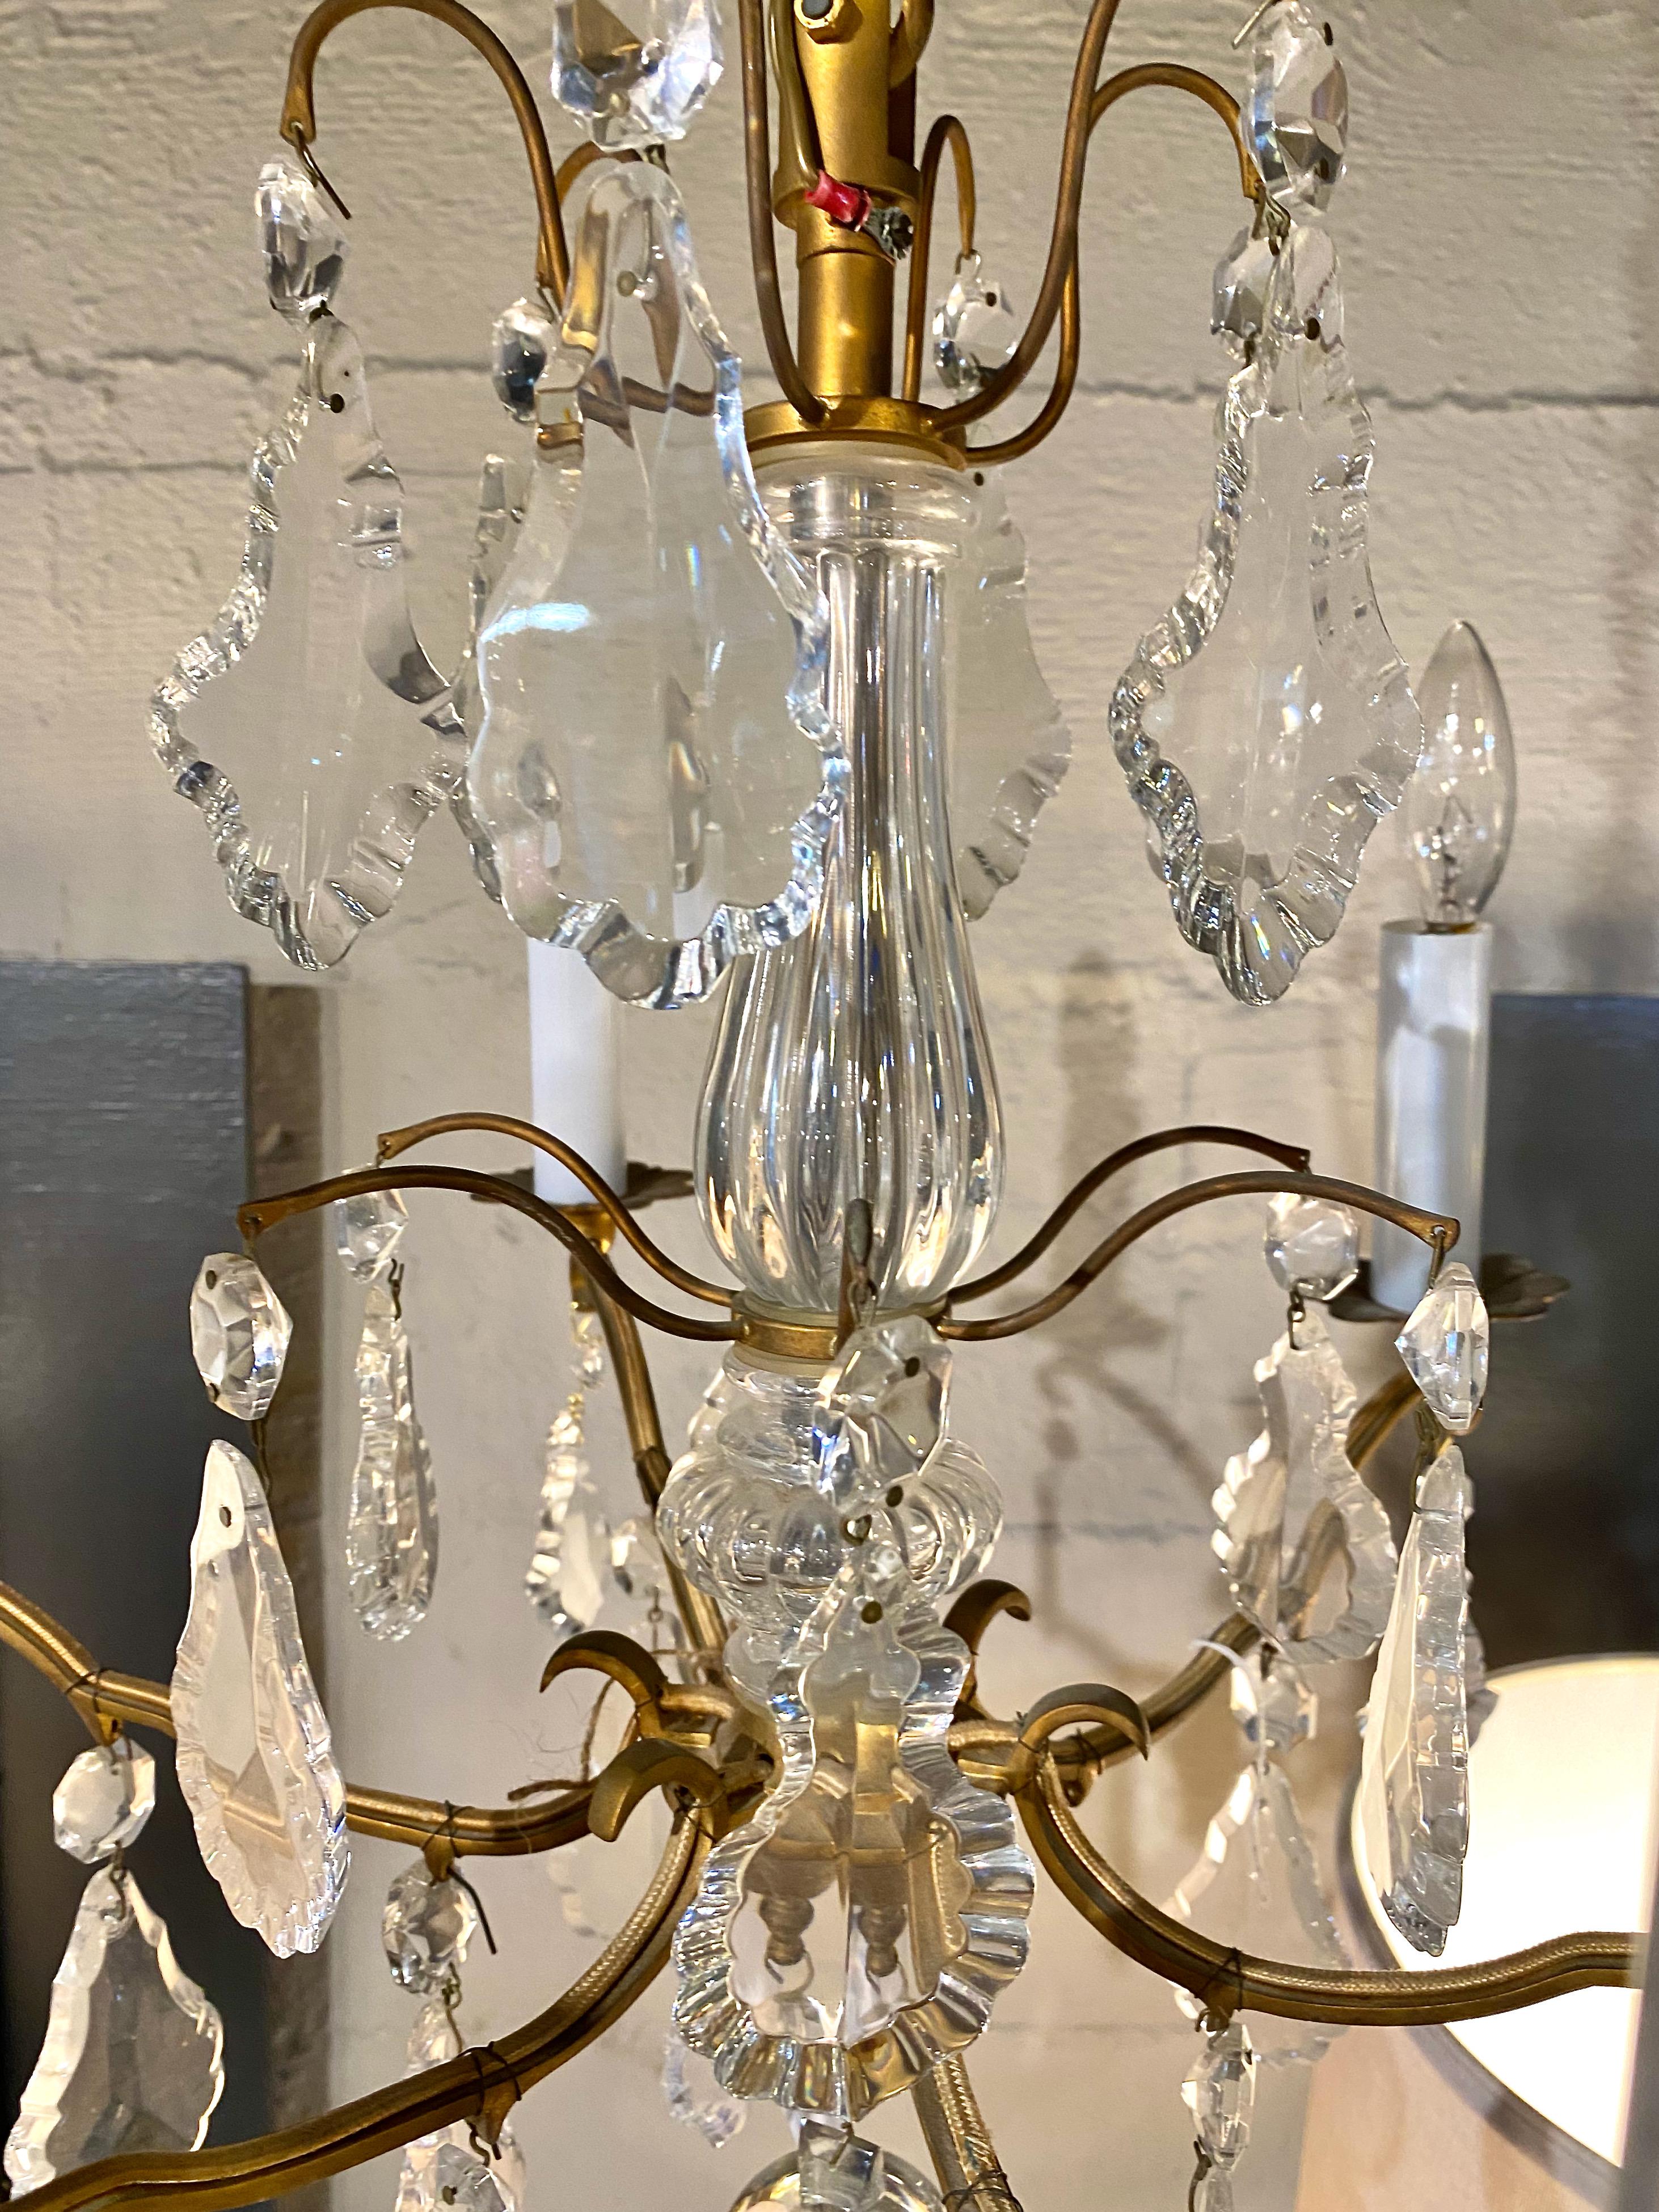 This a great example of a small Baccarat gilt bronze and cut crystal chandelier. The chandelier dates to the late 20th century. The quality of the bronze frame and lead crystal pendants speak for themselves. Please request images of the original